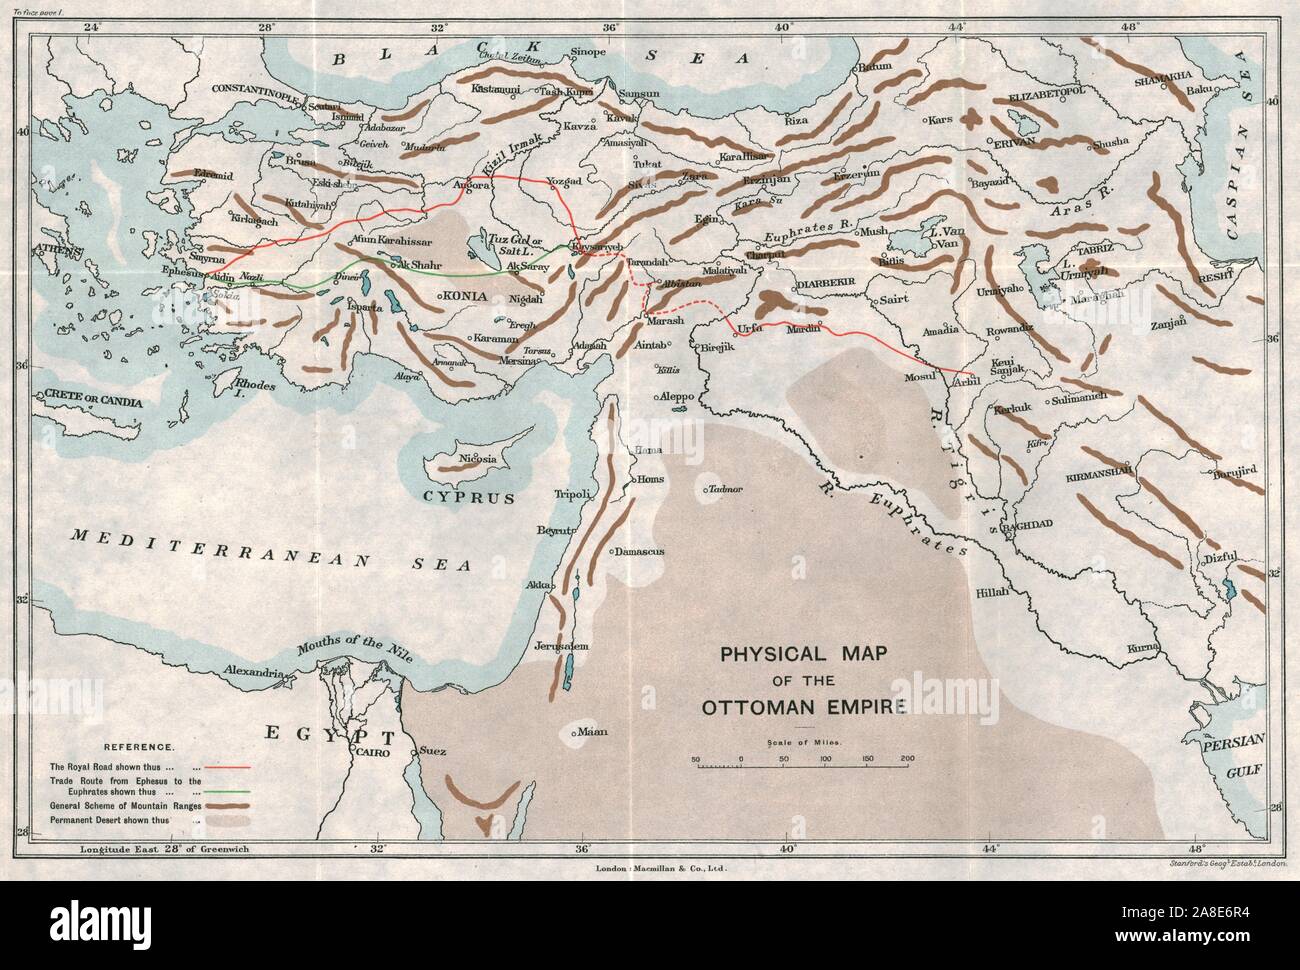 'Physical Map of the Ottoman Empire', c1915. Map showing the eastern Mediterranean, Cyprus, the Middle East, the rivers Tigris and Euphrates, what is now Turkey, and part of Egypt. Also shown are the 'Royal Road', trade routes, mountain ranges and deserts. From &quot;The Caliphs' Last Heritage, a short history of the Turkish Empire&quot; by Lt.-Col. Sir Mark Sykes. [Macmillan &amp; Co, London, 1915] Stock Photo